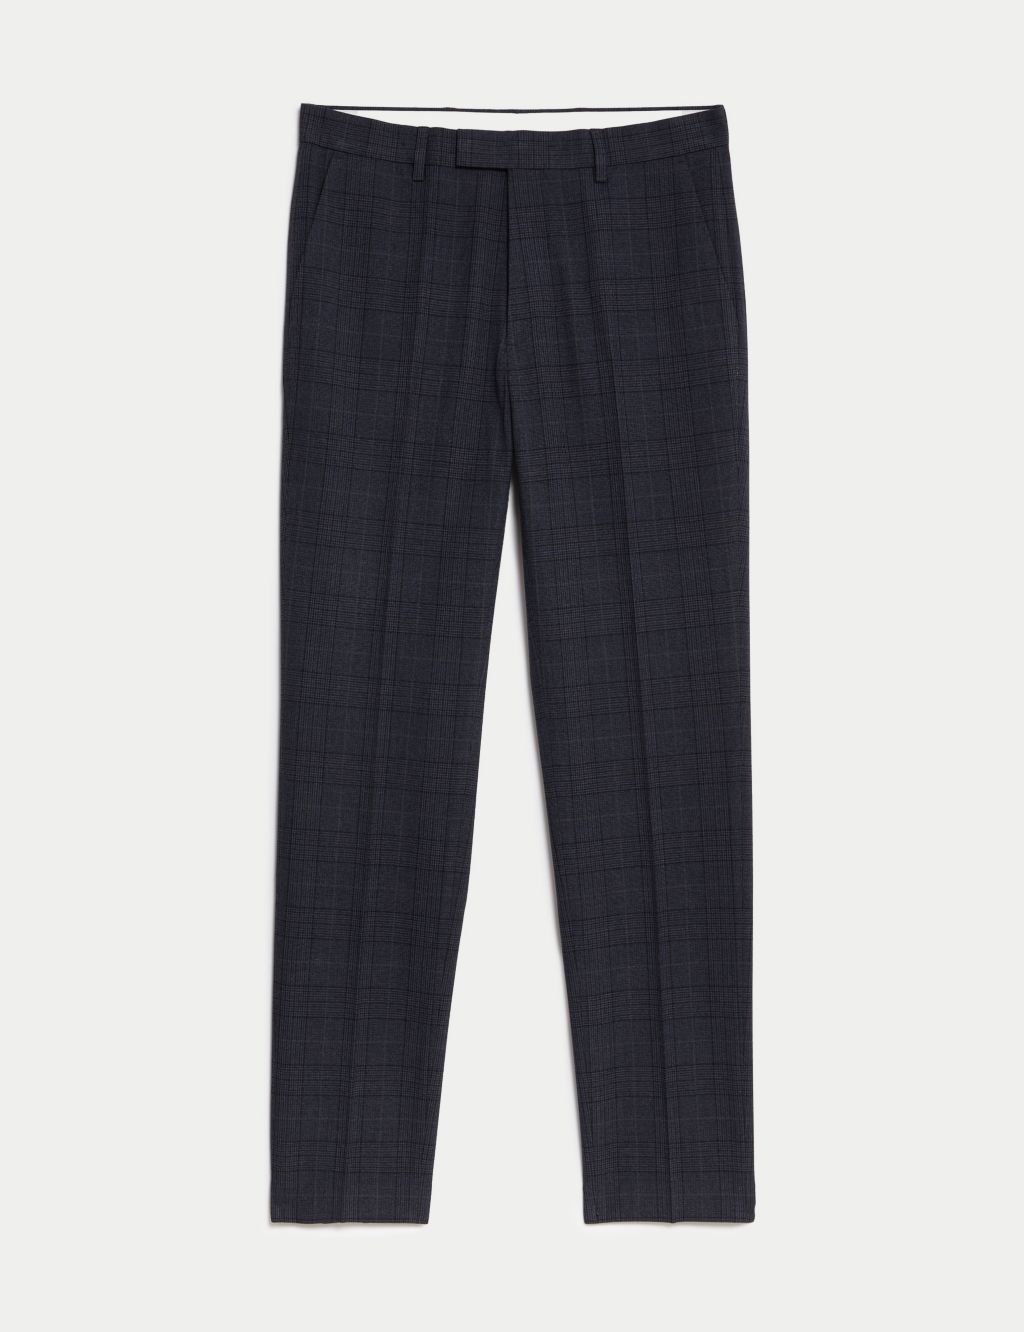 Check Stretch Trousers image 7